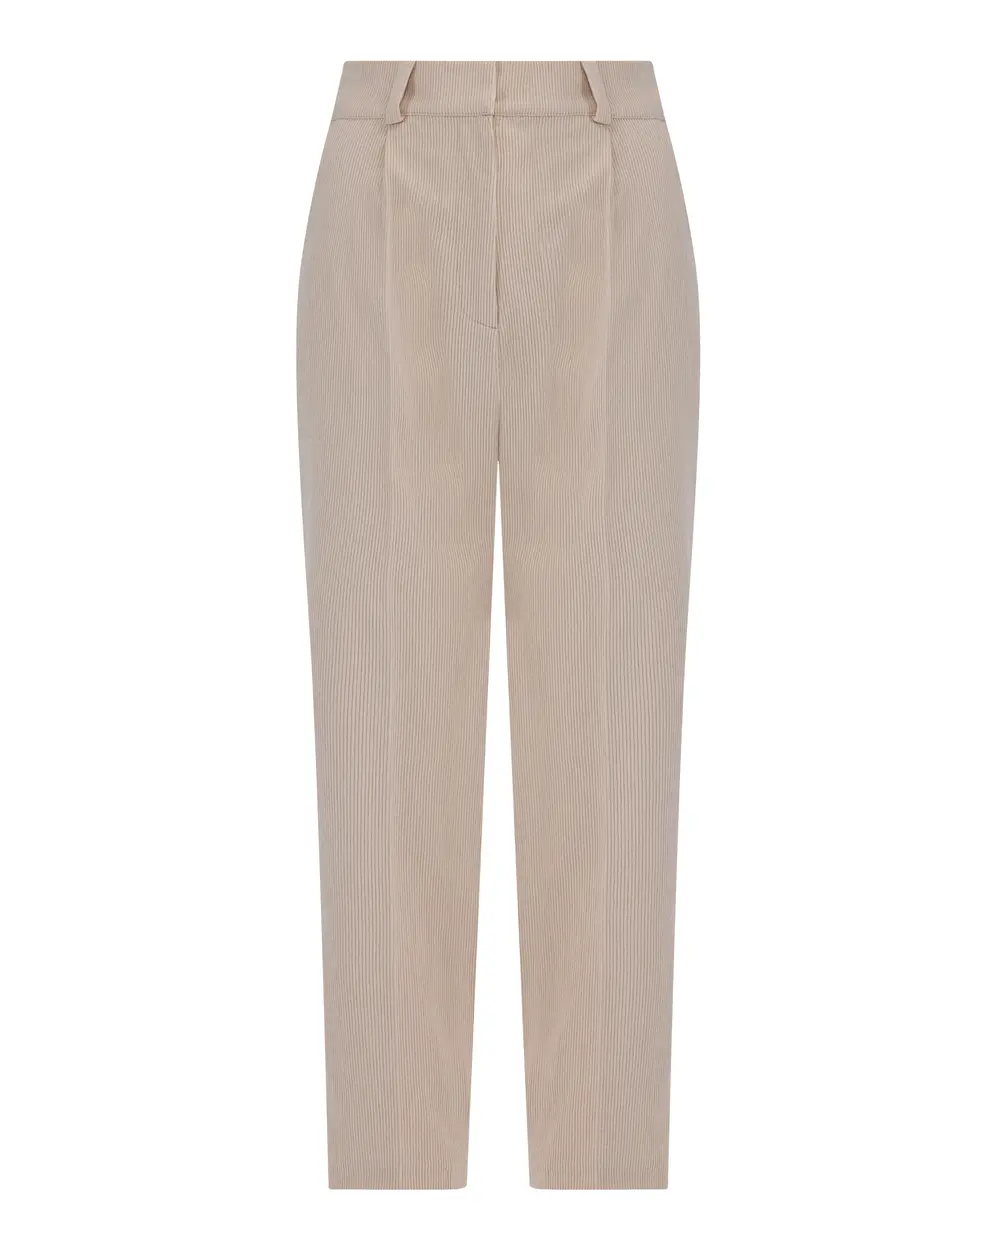 Carrot Cut Ankle Length Corduroy Trousers